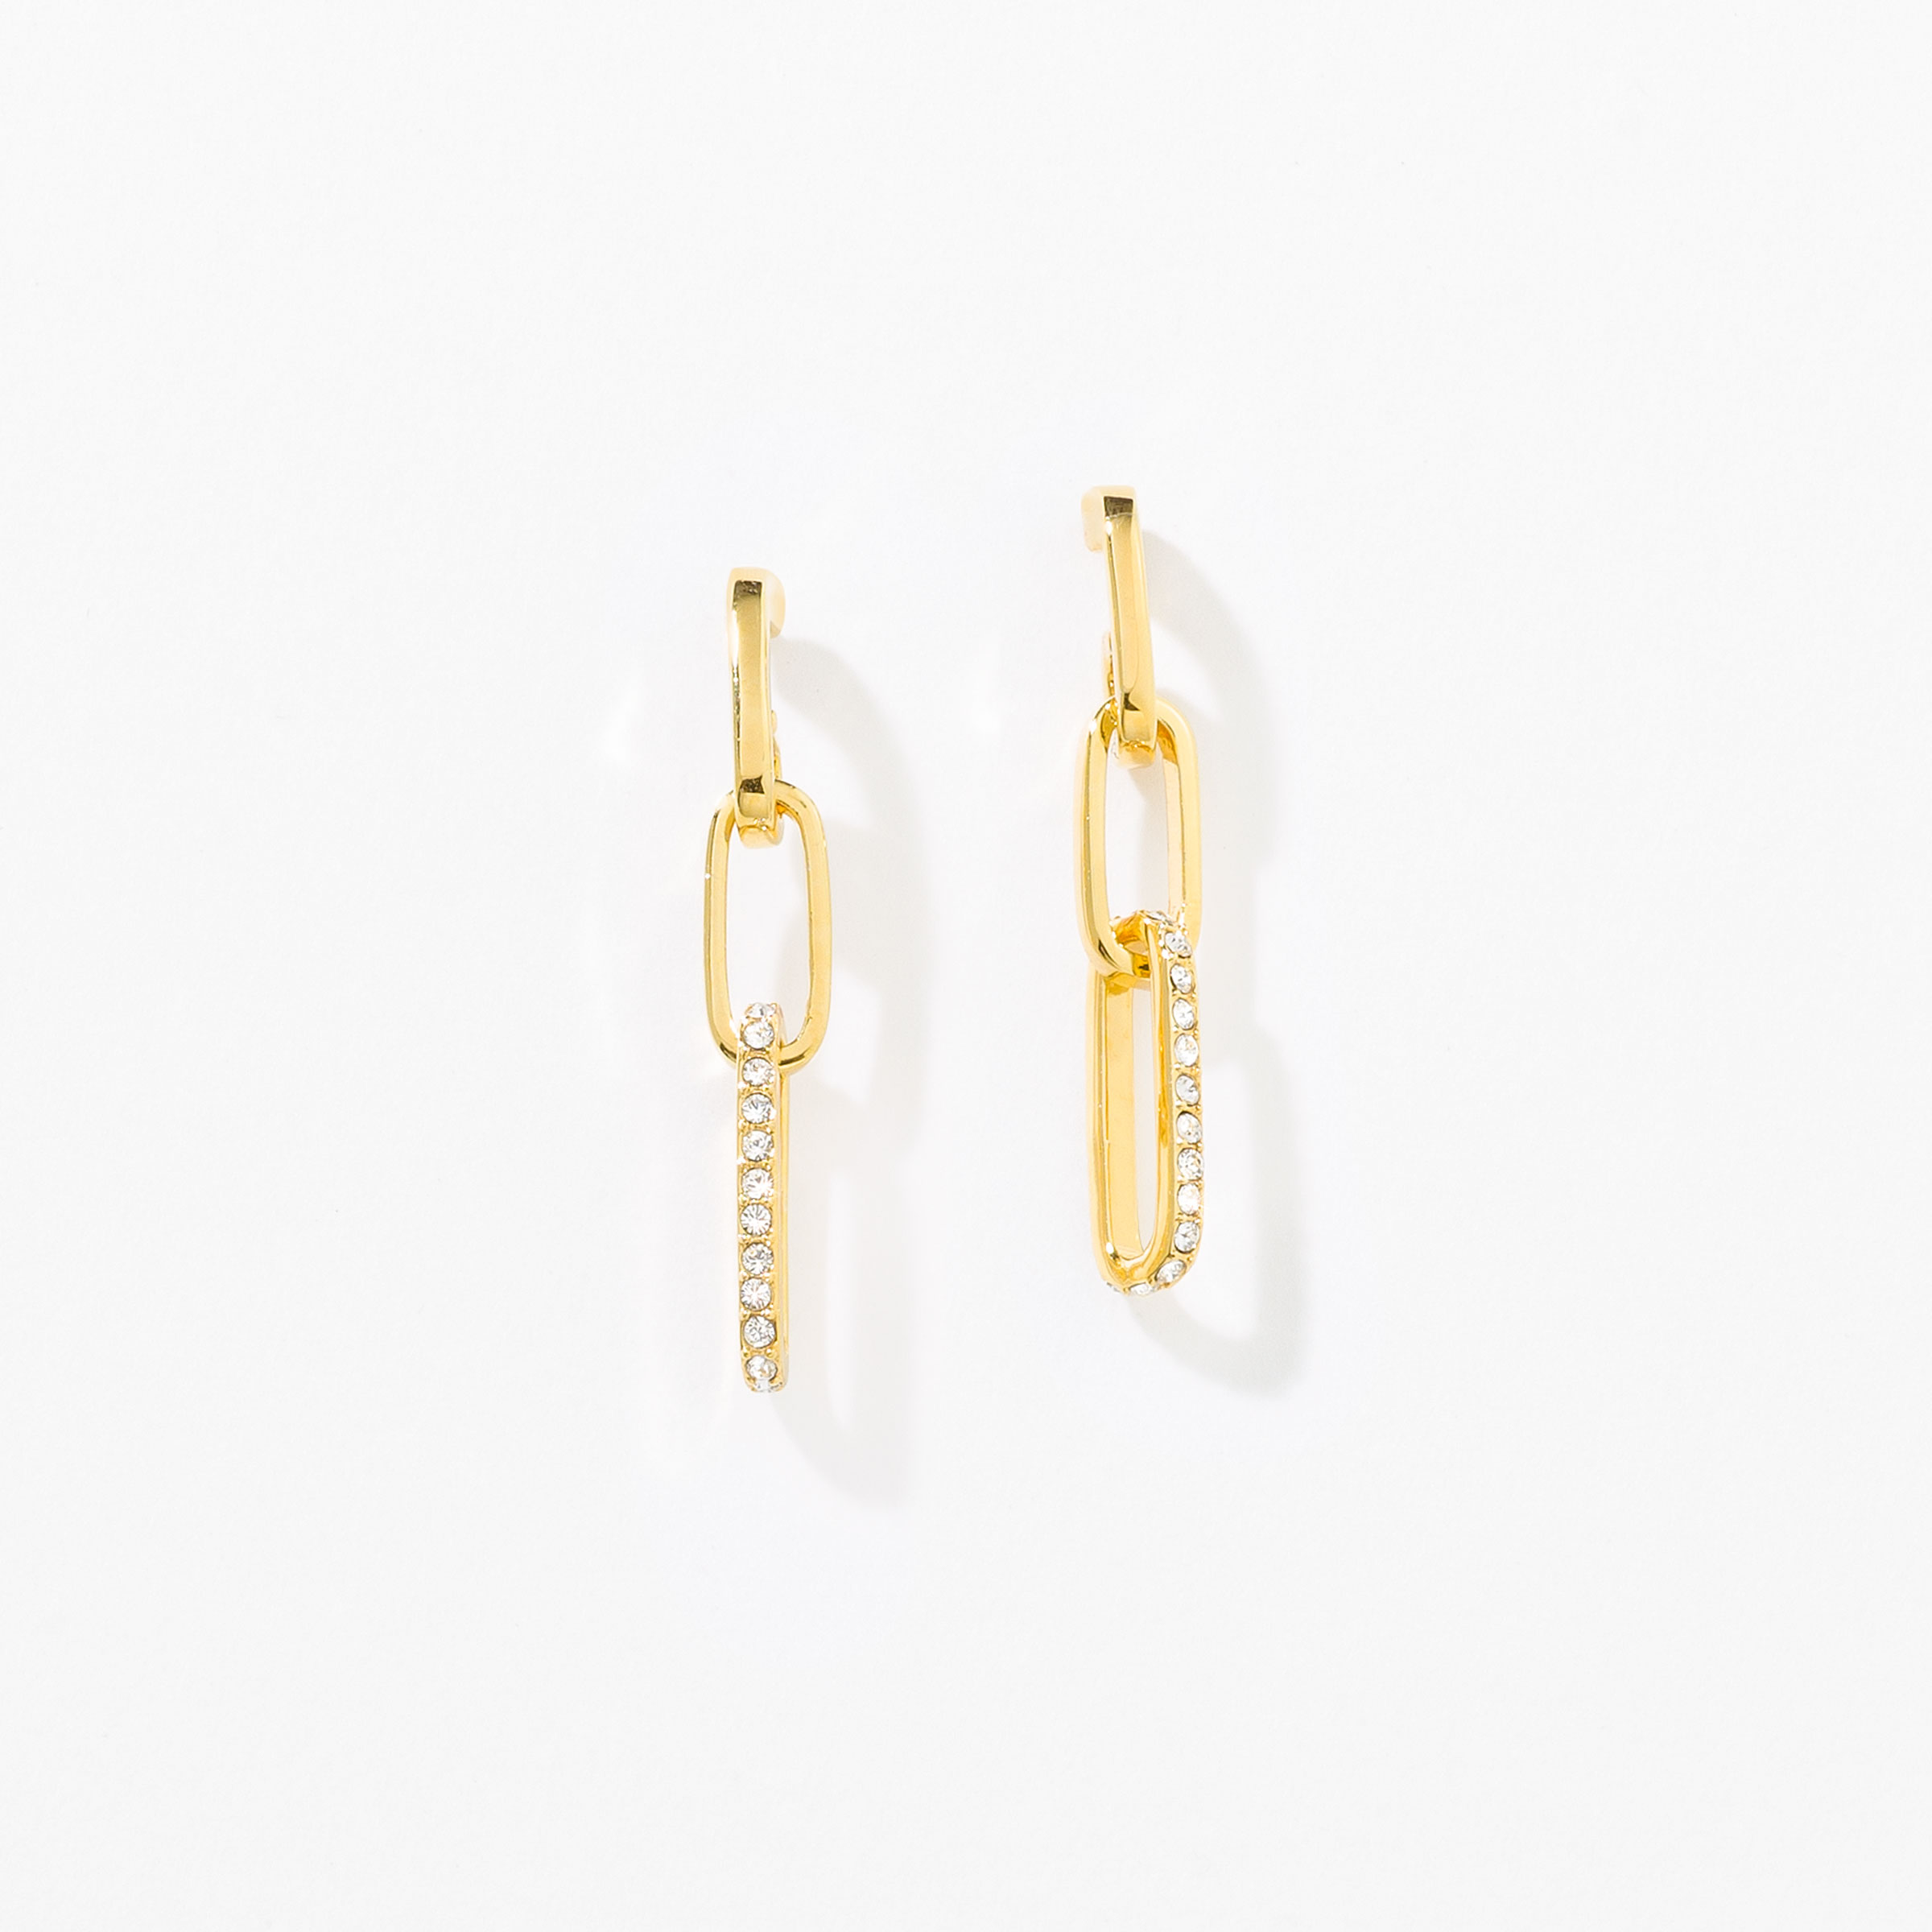 Join Together Earrings, Golden